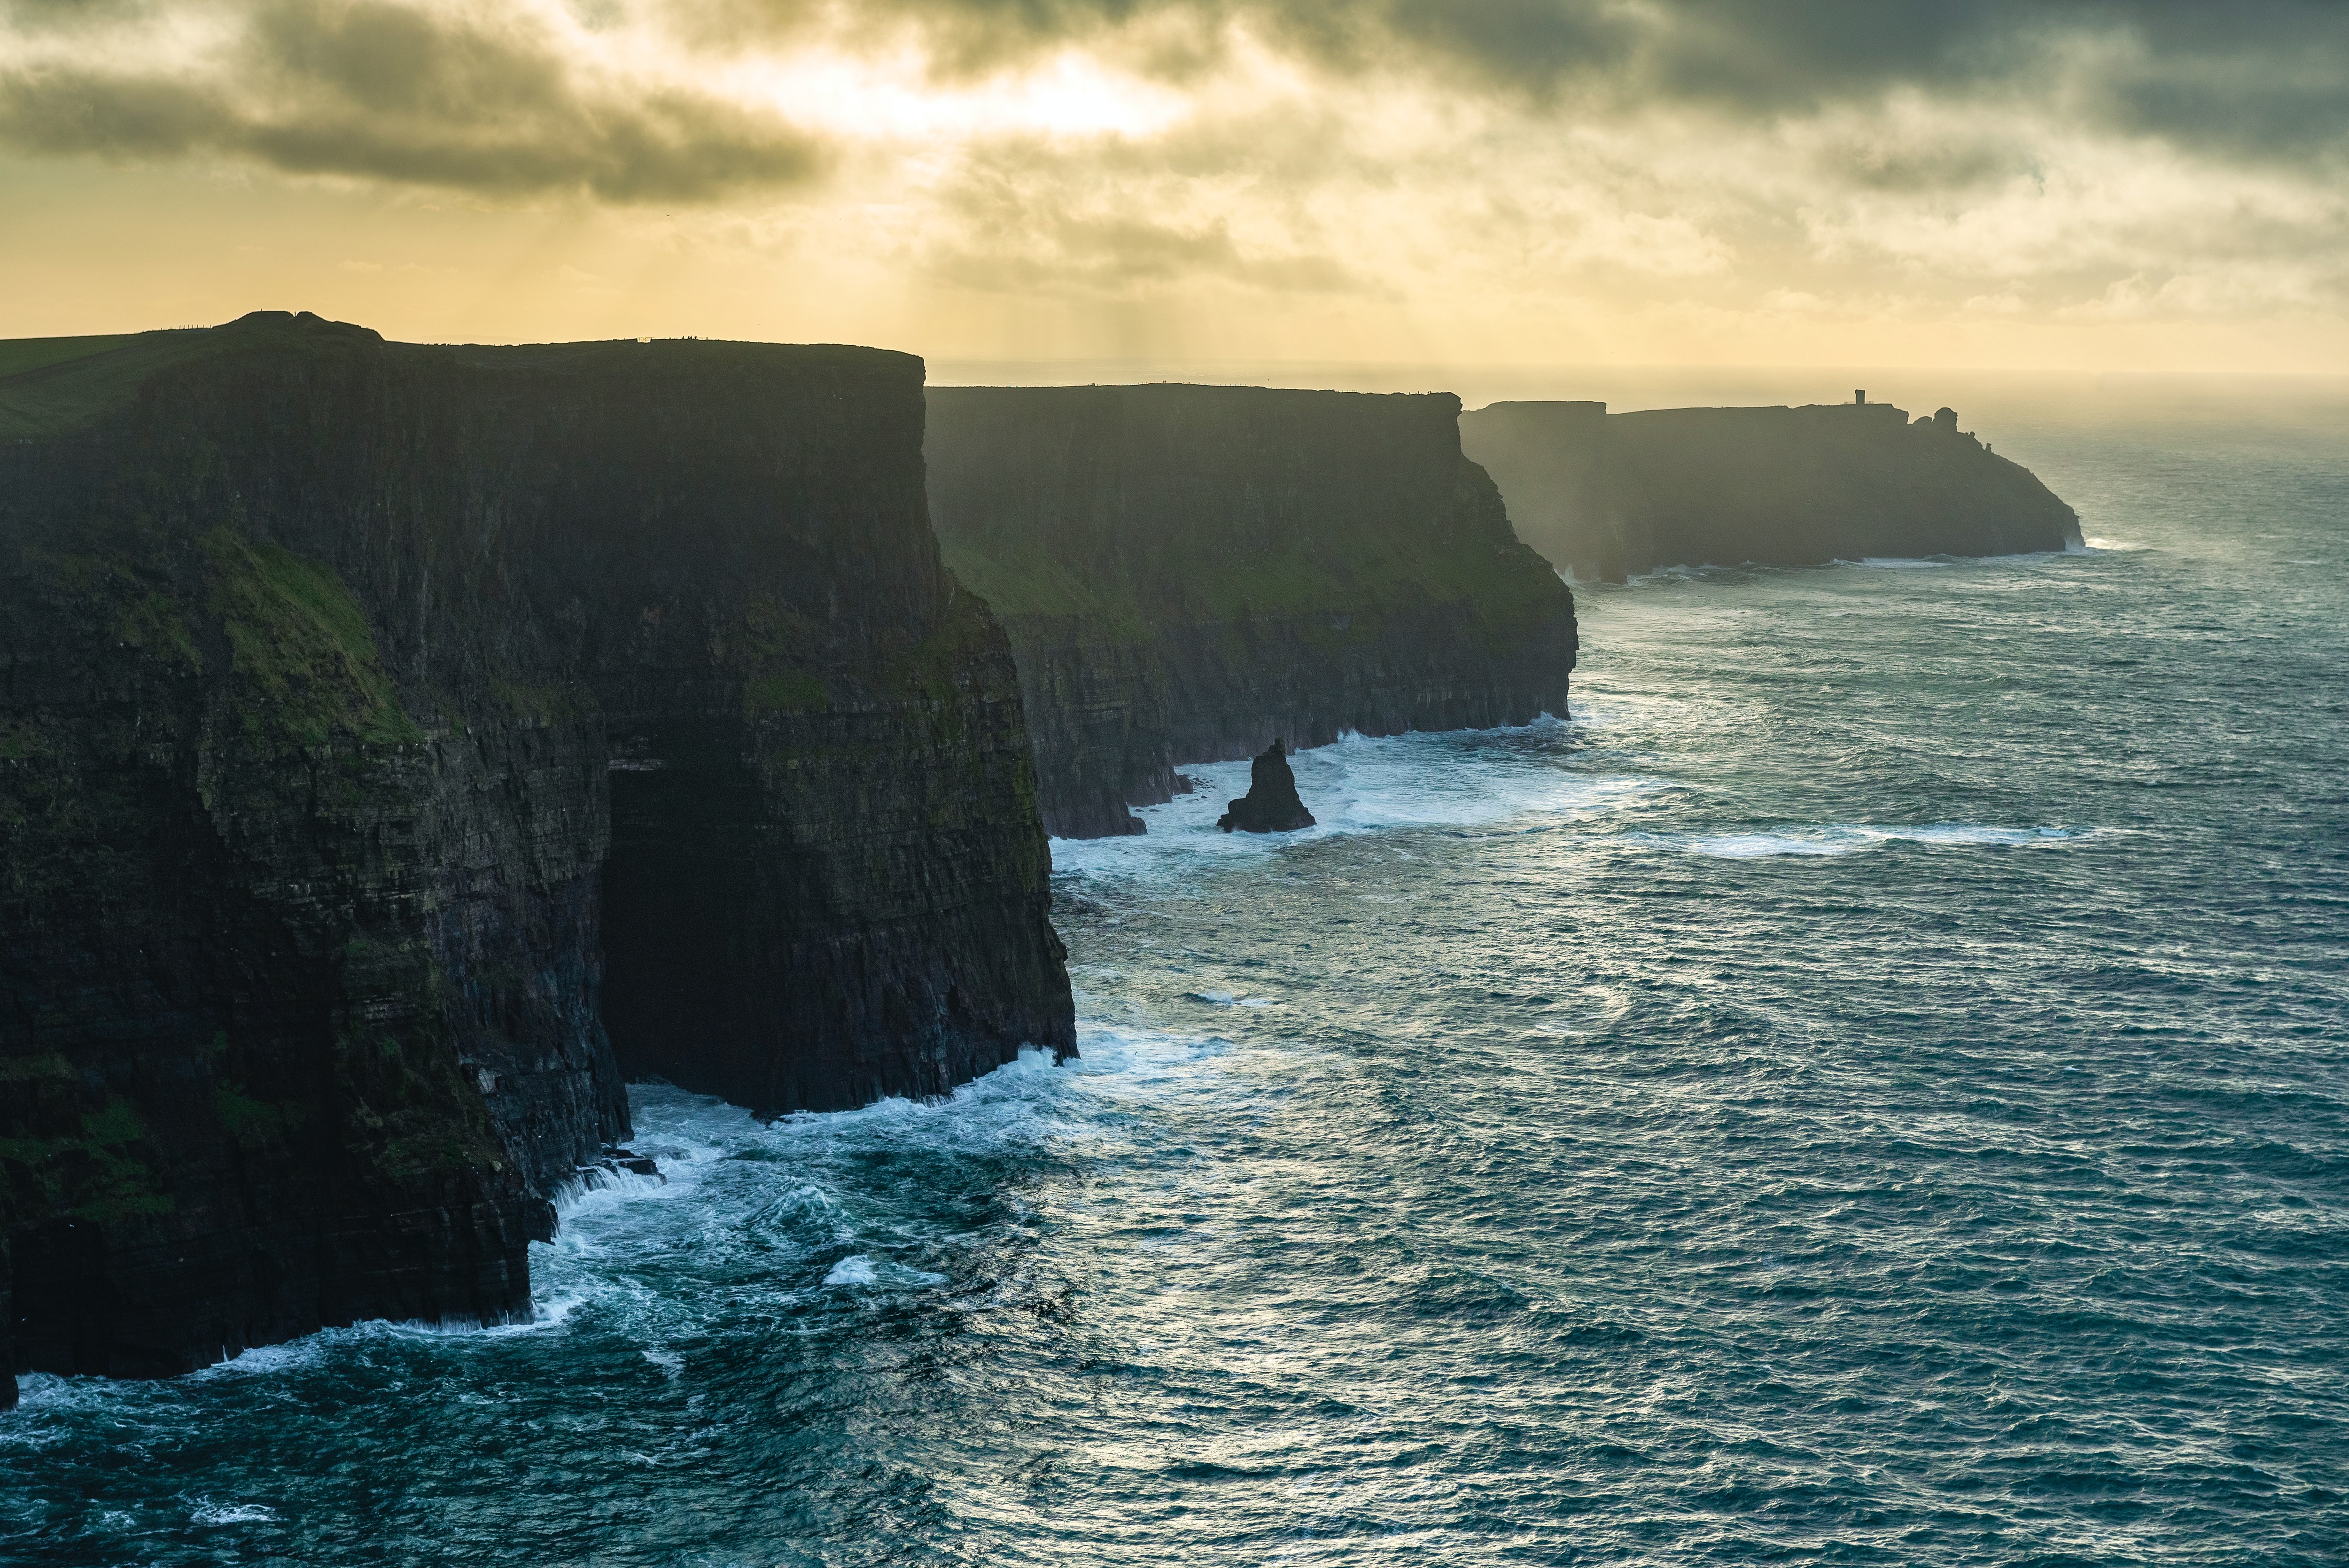 Places in Dublin, Cliffs of Moher